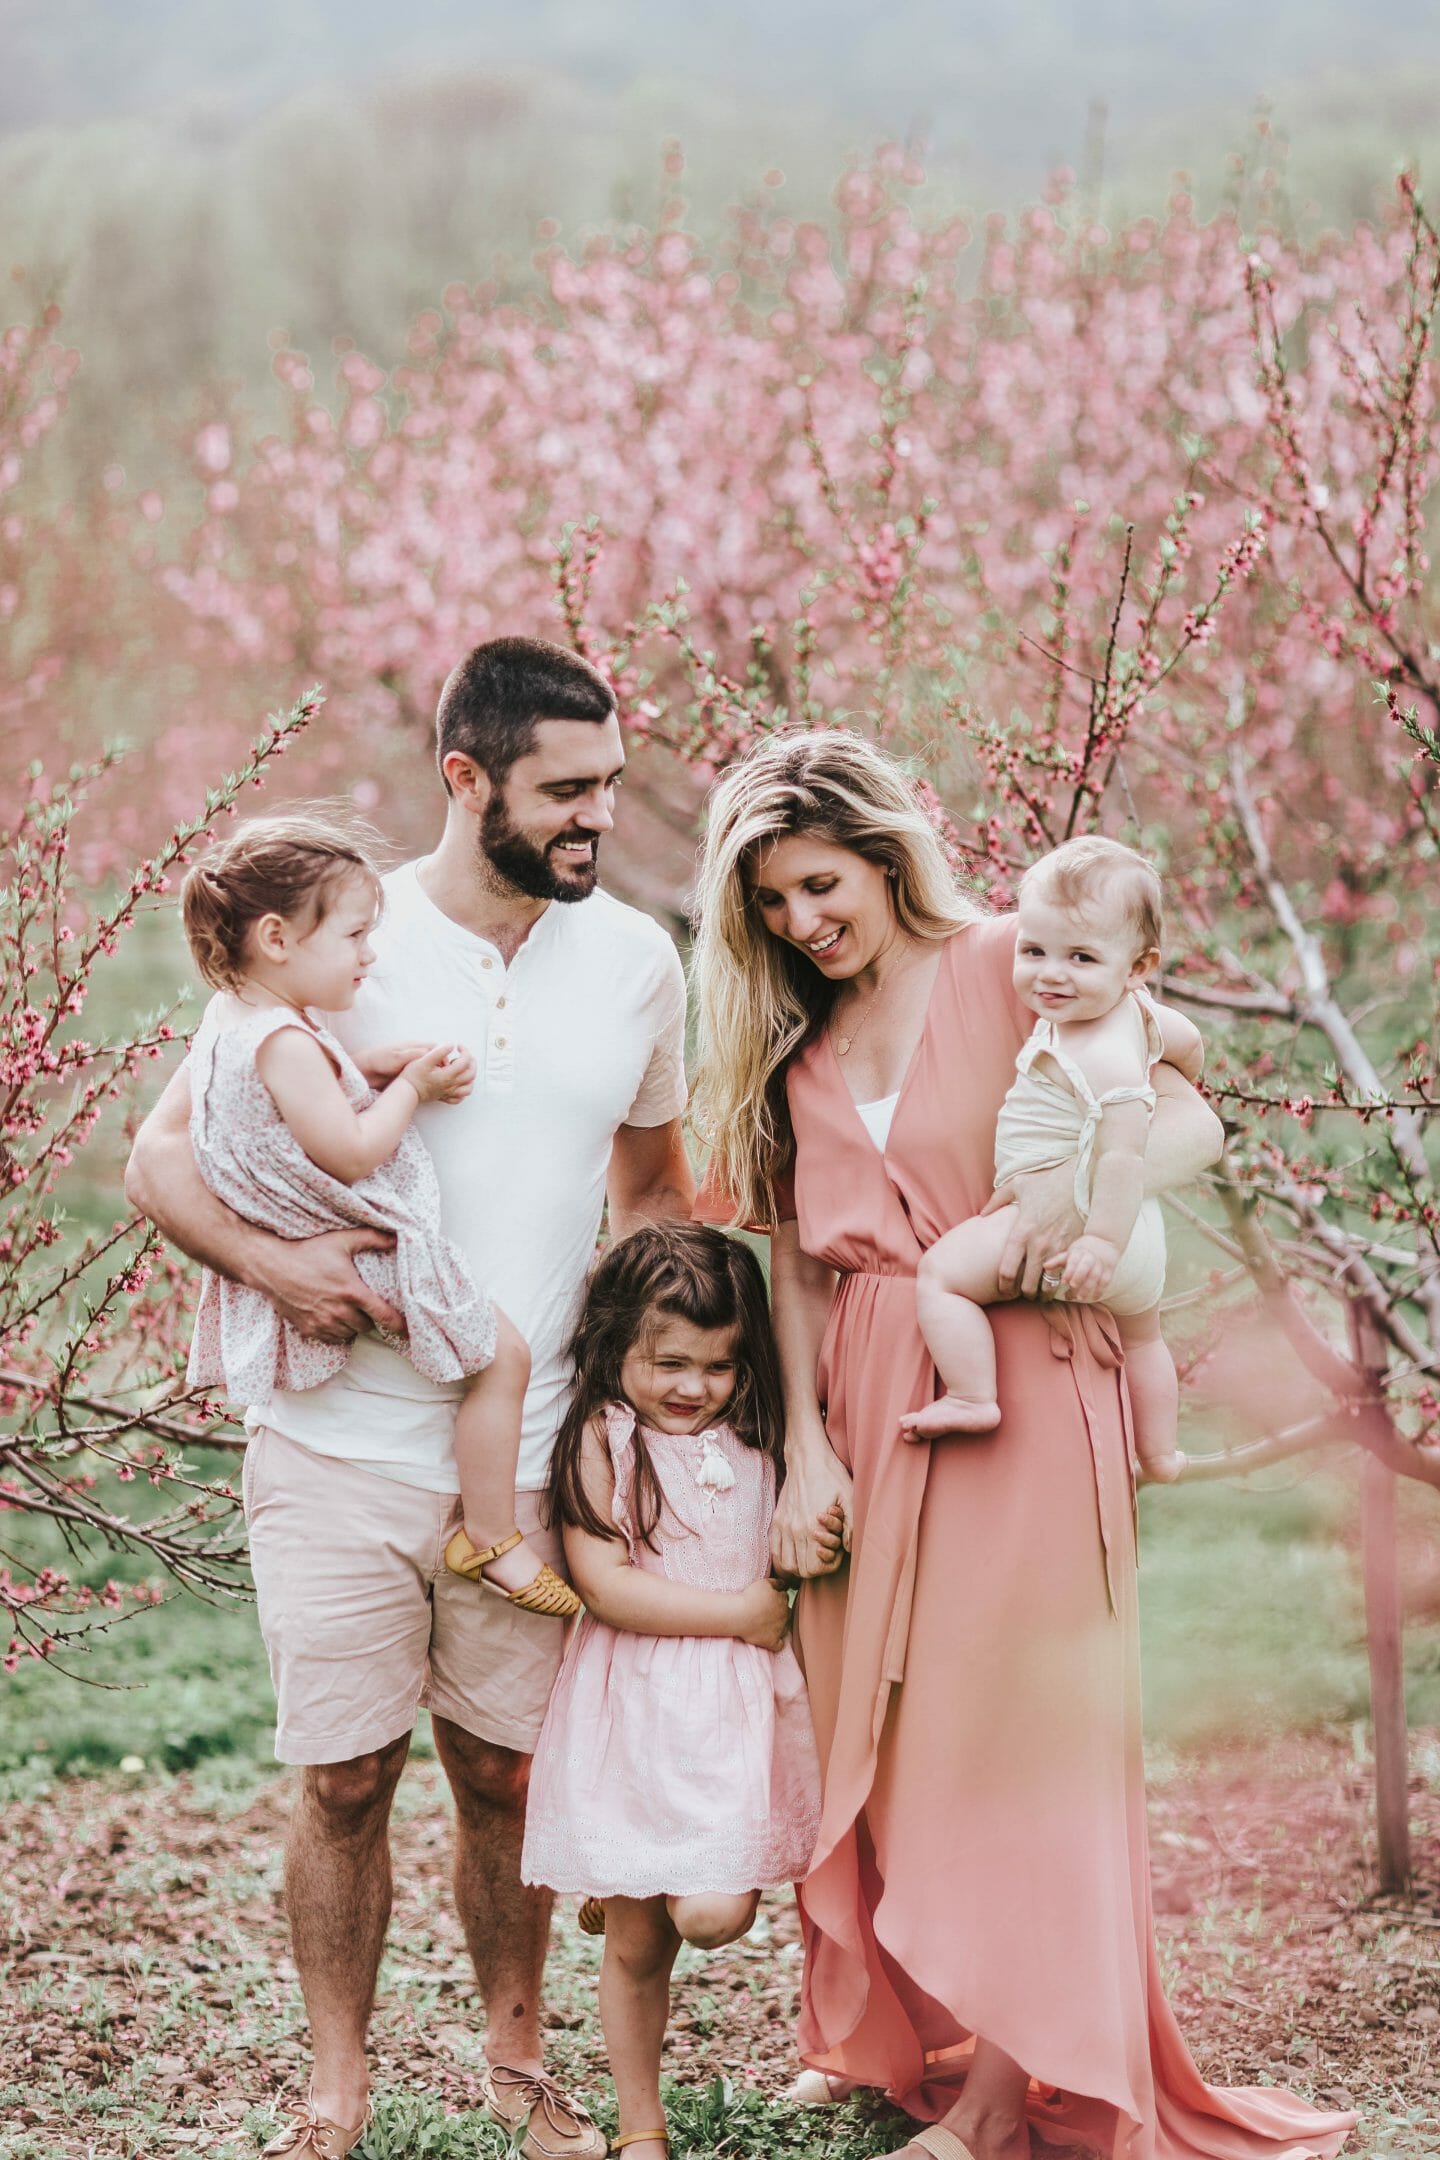 Pink-outfit-1 70+ Best Chosen Family Photo Outfit Ideas in Summer 2022